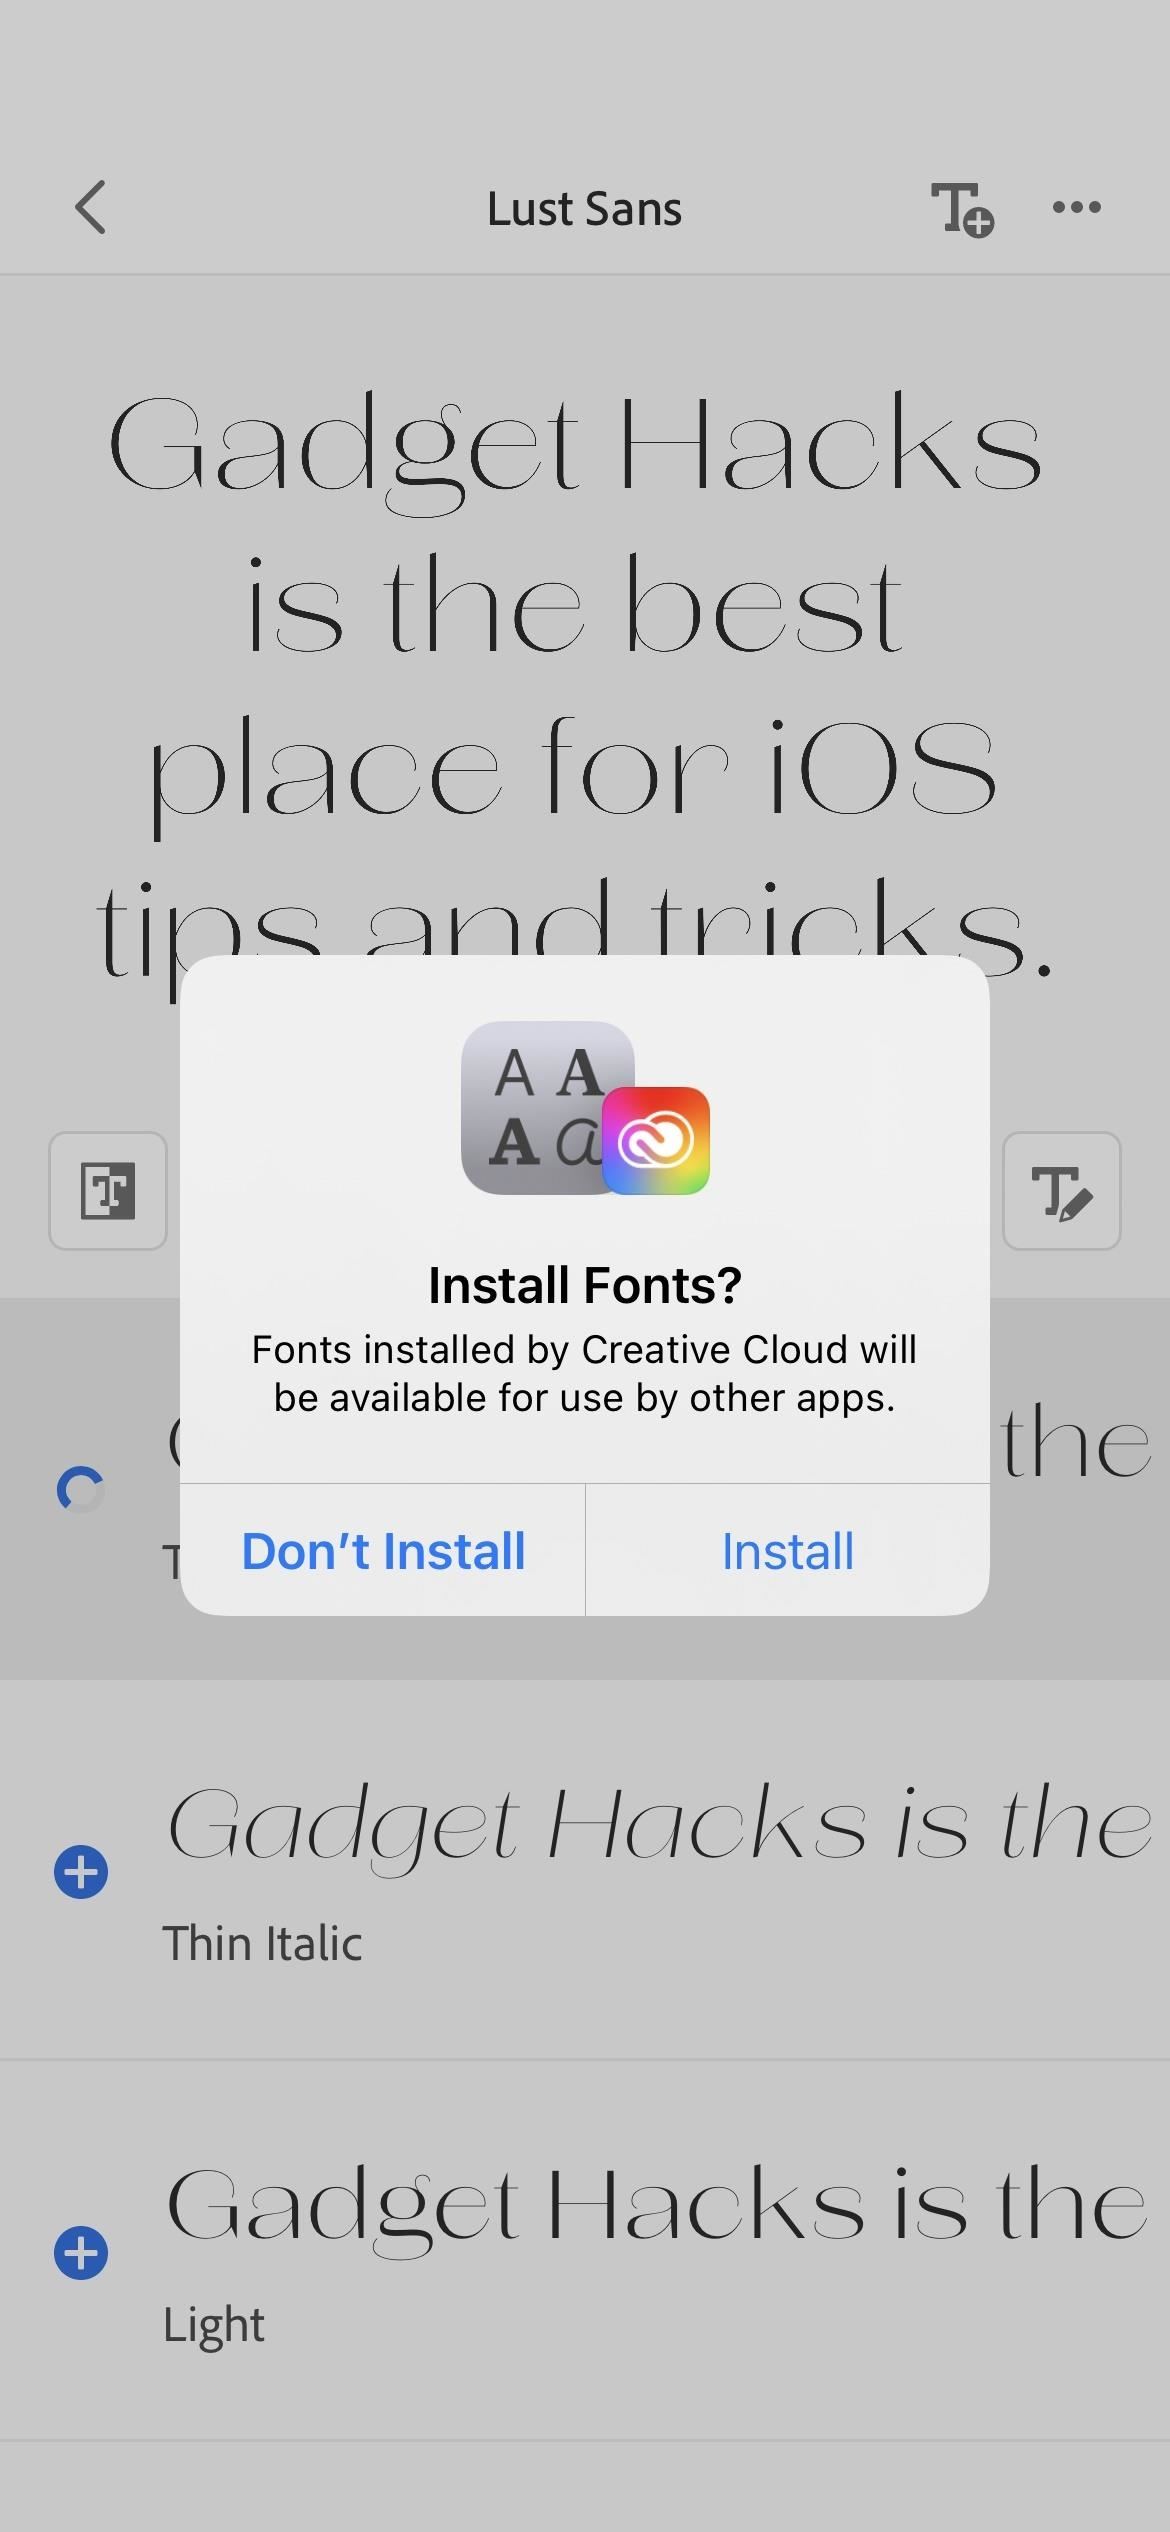 This App Gives You Thousands of Free Custom Fonts for Your iPhone's Stock Keyboard